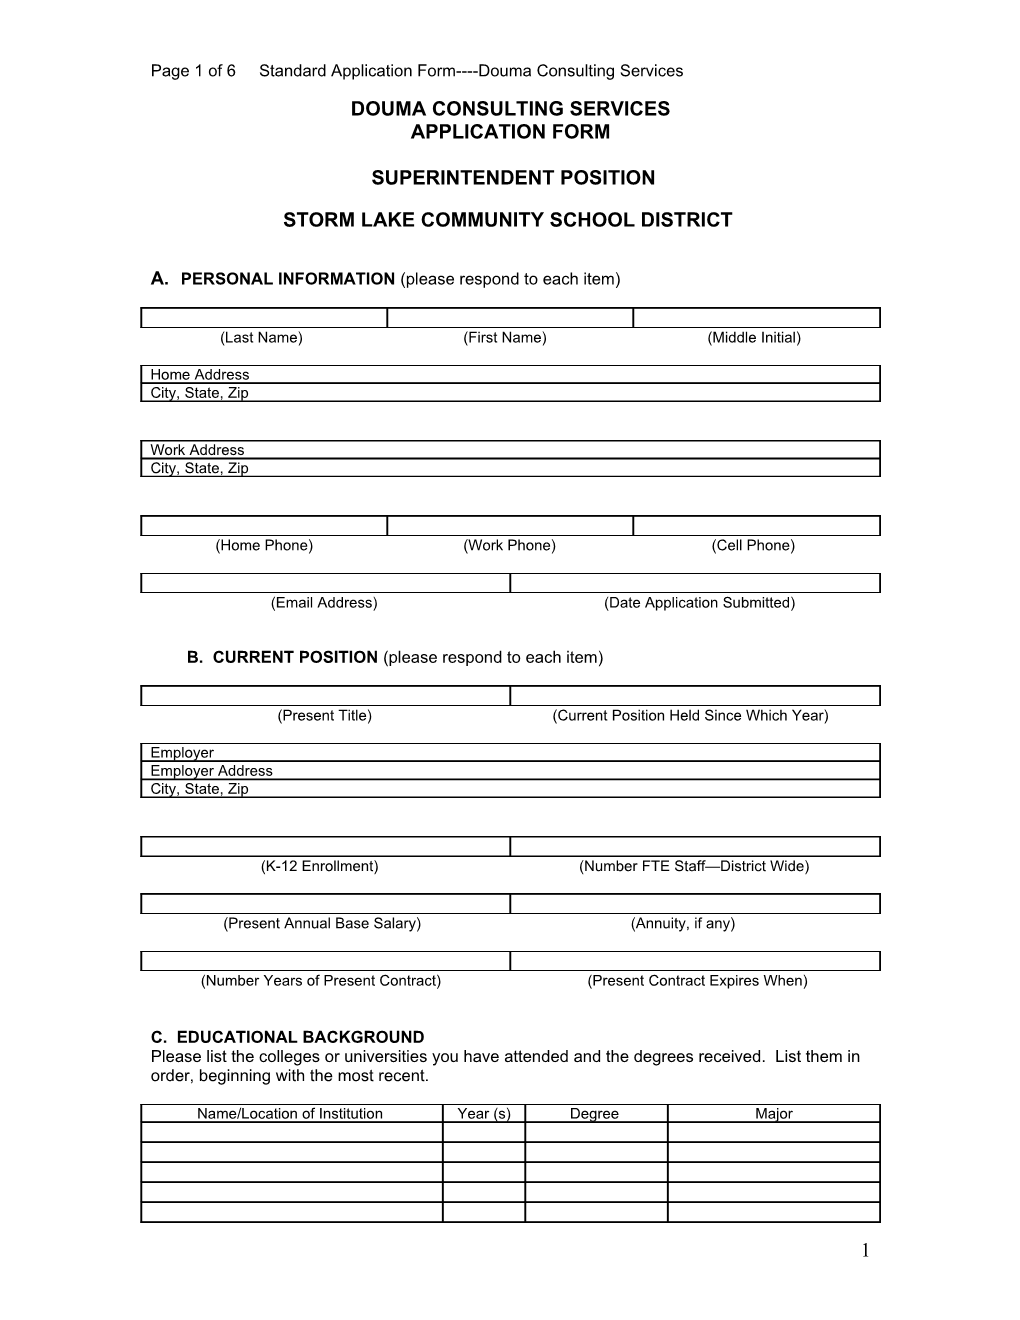 Page 1 of 1 Standard Application Form Douma Consulting Services